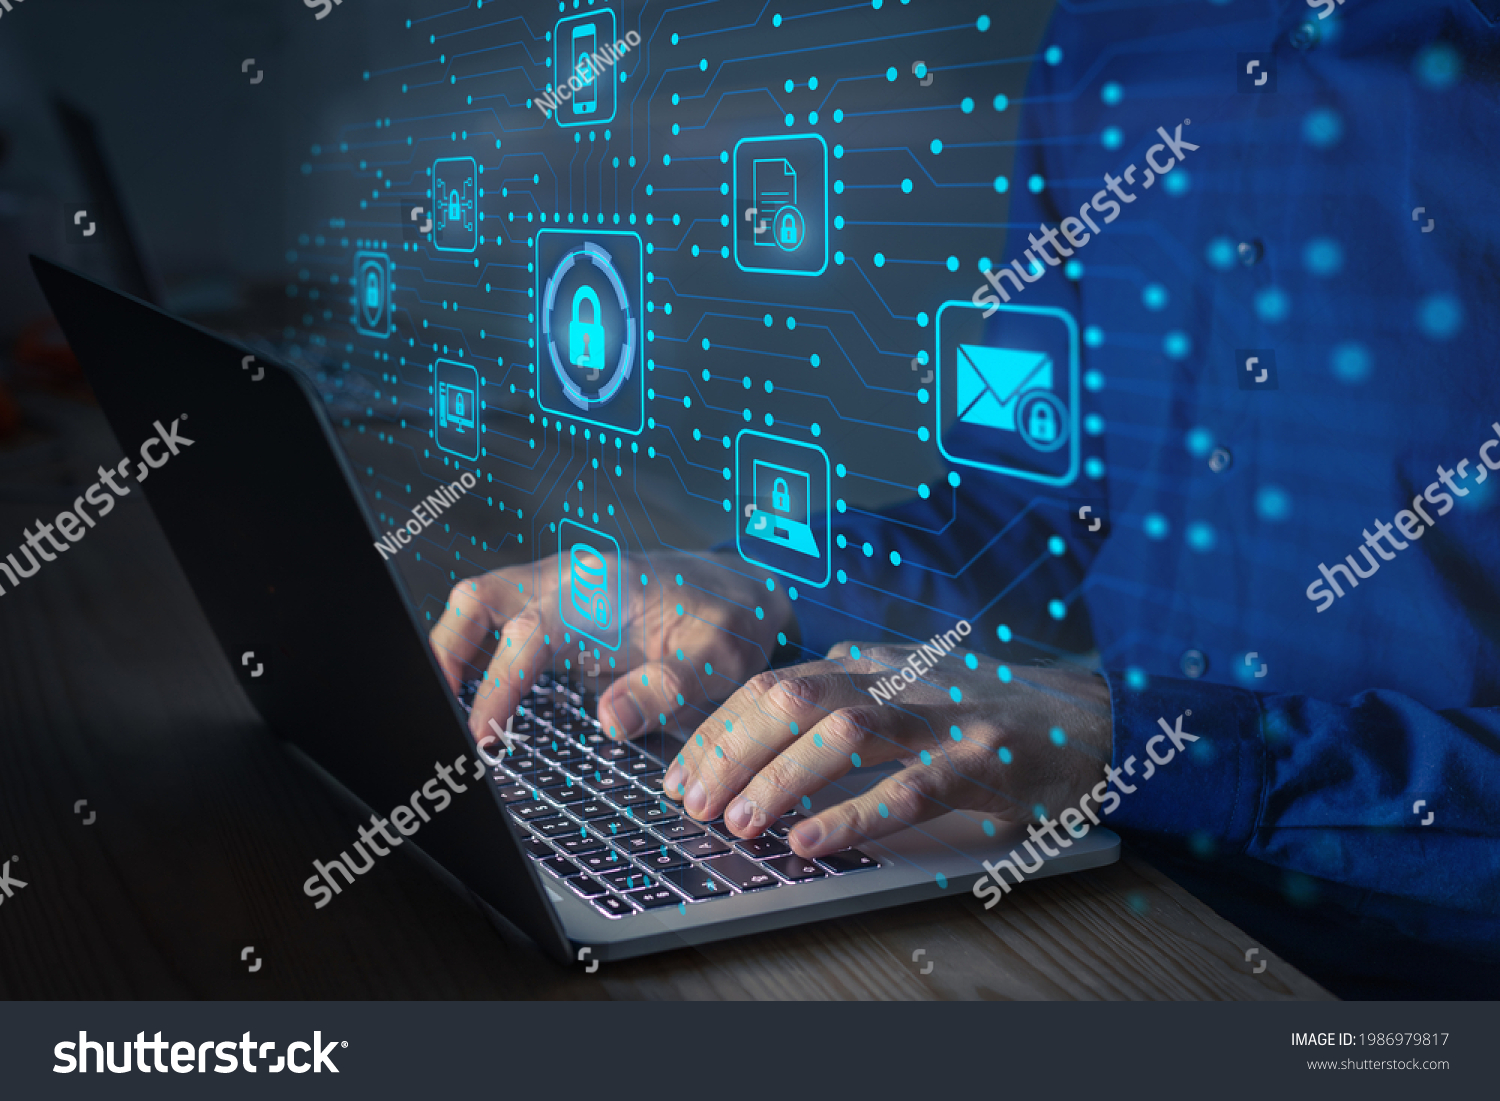 Cyber security IT engineer working on protecting network against cyberattack from hackers on internet. Secure access for online privacy and personal data protection. Hands typing on keyboard and PCB #1986979817